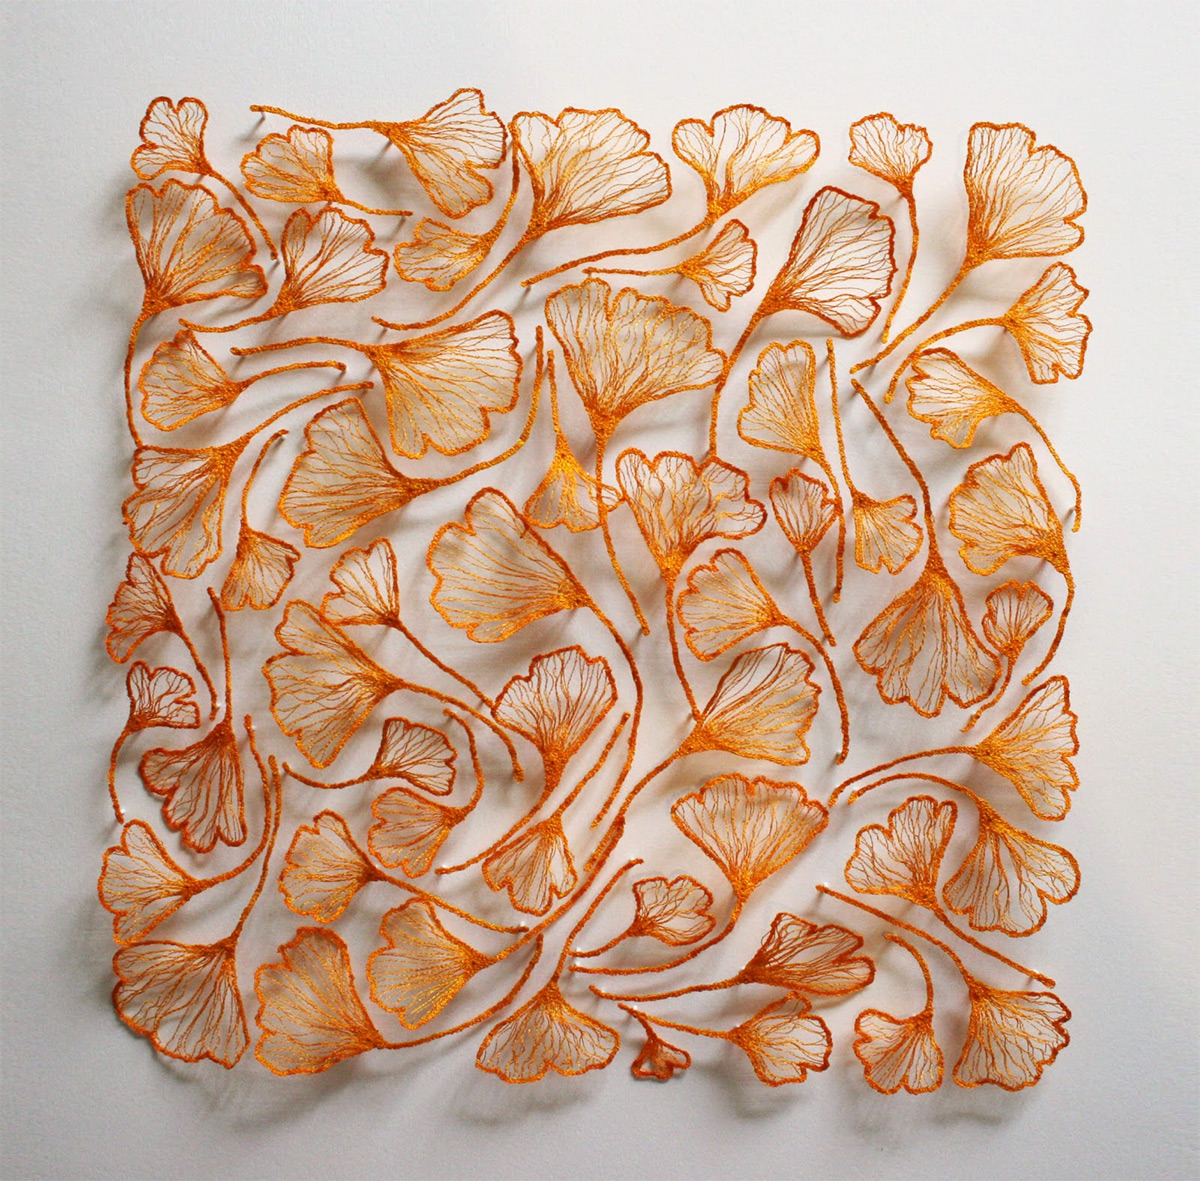  Meredith Woolnough’s Embroideries Mimic Delicate Forms of Nature Woolnough uses